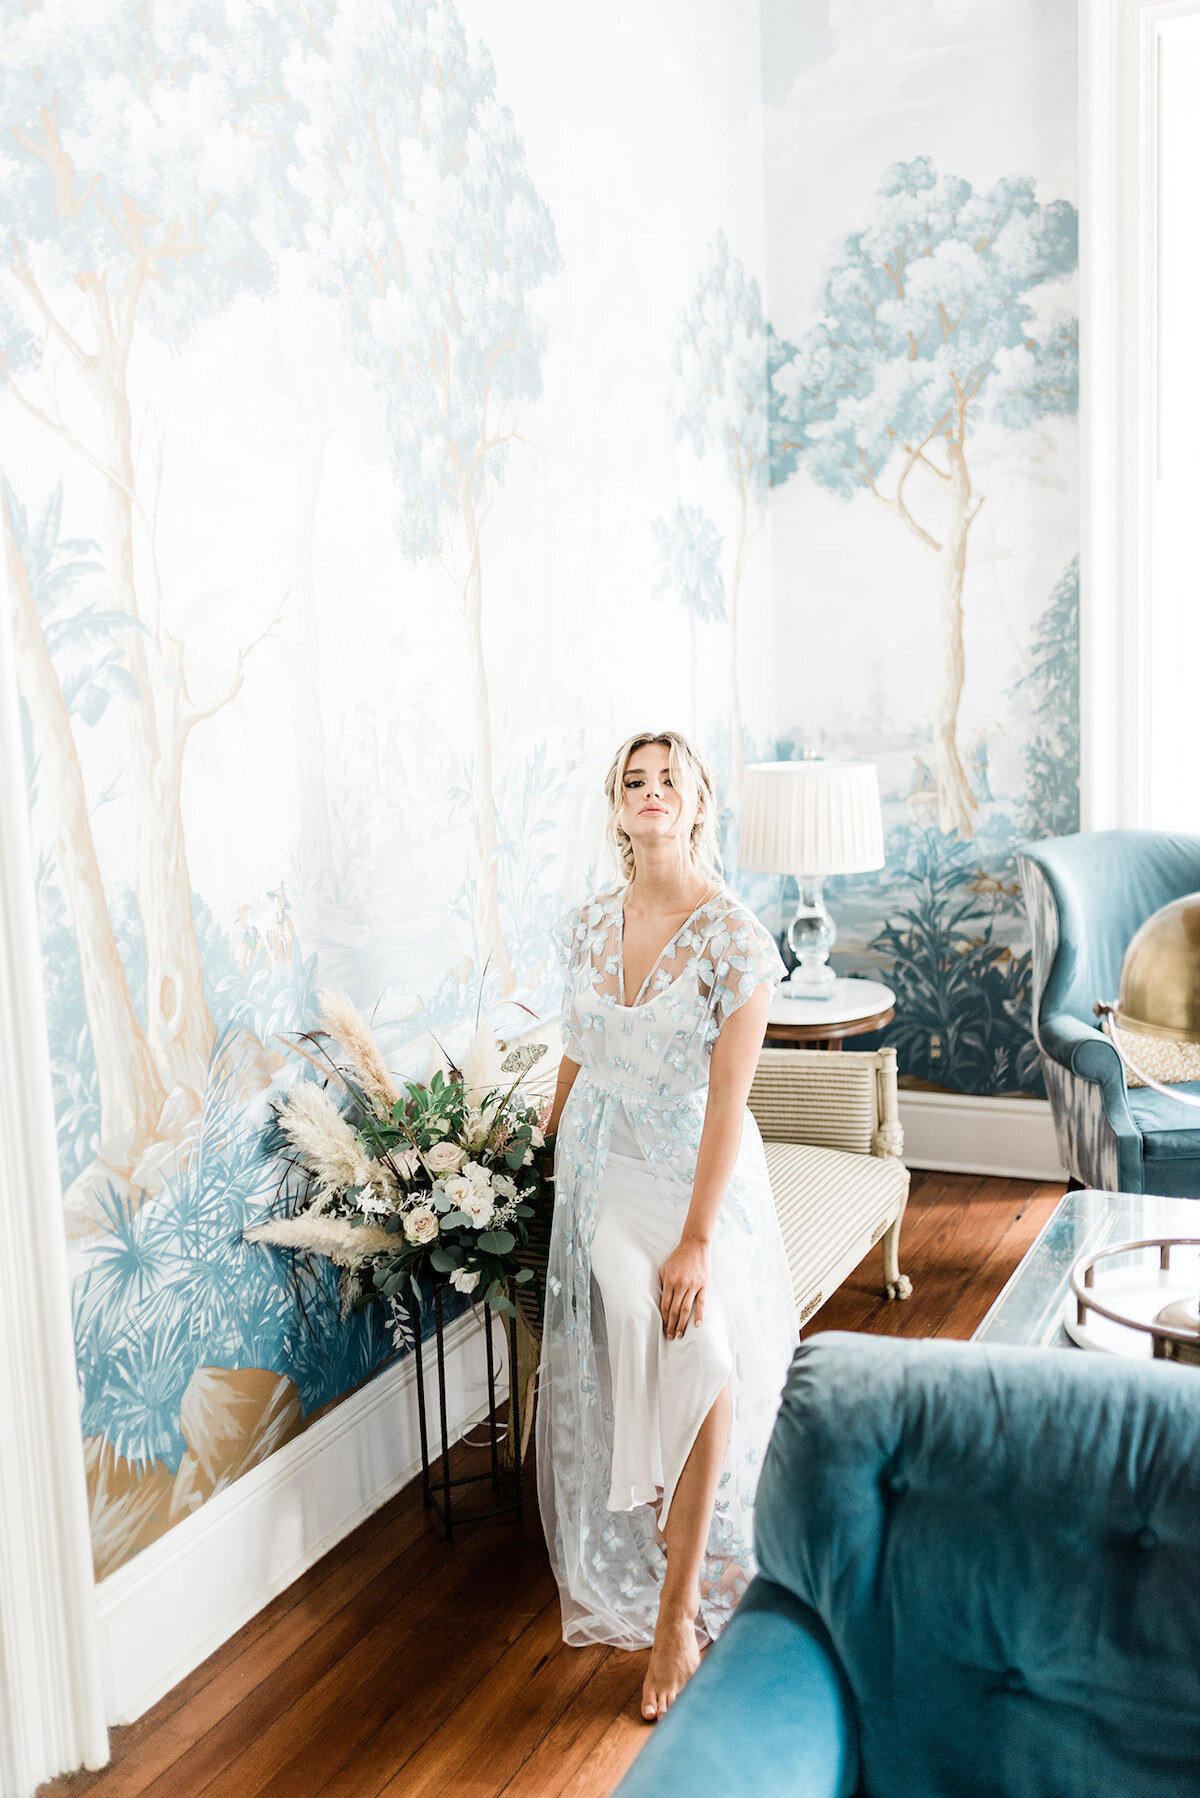 Elevate your couture bridal fashion experience with our photography services. Our lens transforms each ensemble into an elevated masterpiece, capturing the sophistication and creativity of high-end fashion.